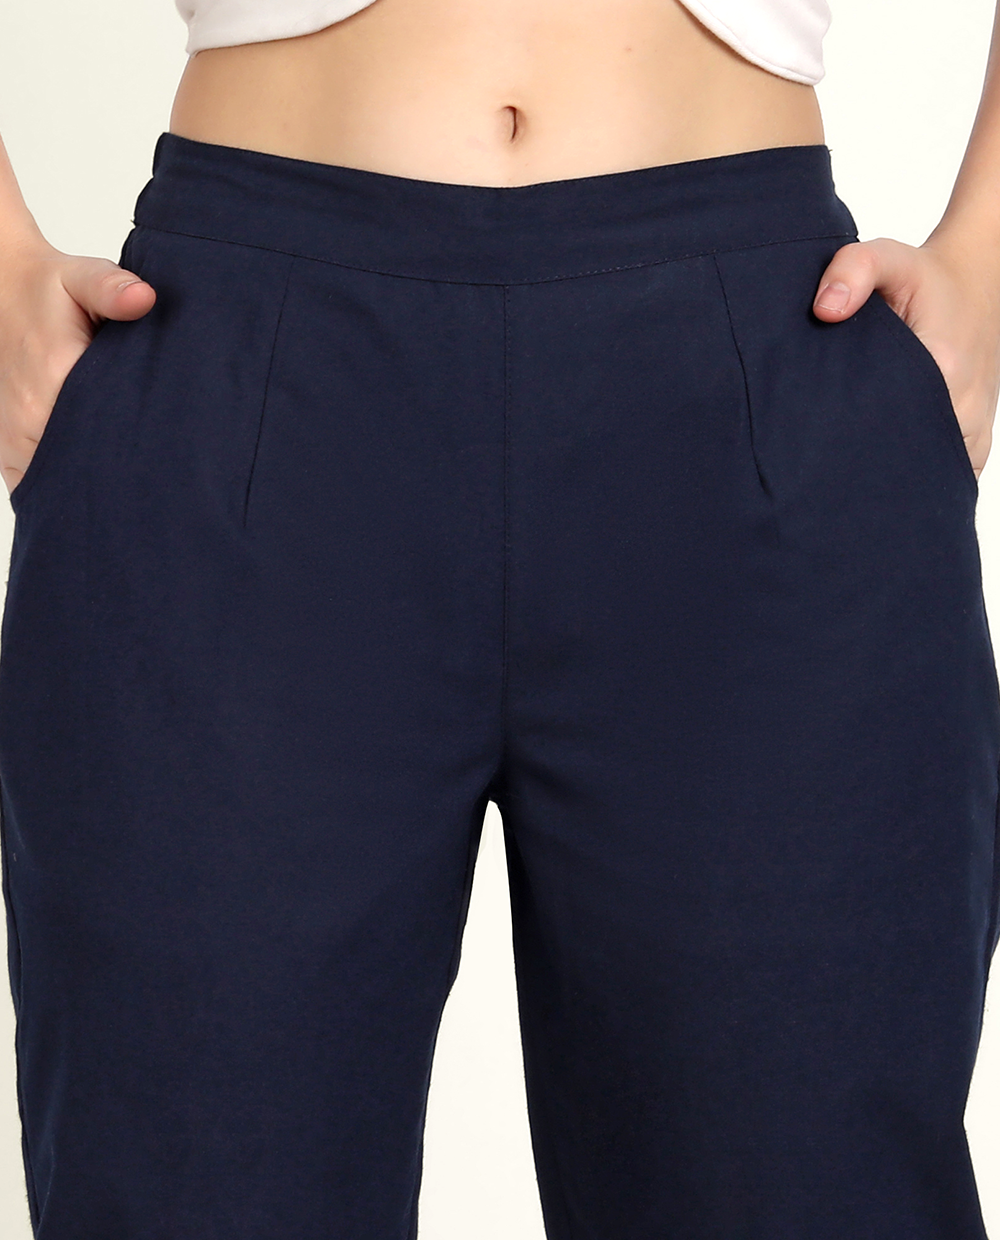 Buy NGT Navy Blue Regular Fit Cotton Trouser Pants For Women 5XL Online  at Best Prices in India  JioMart